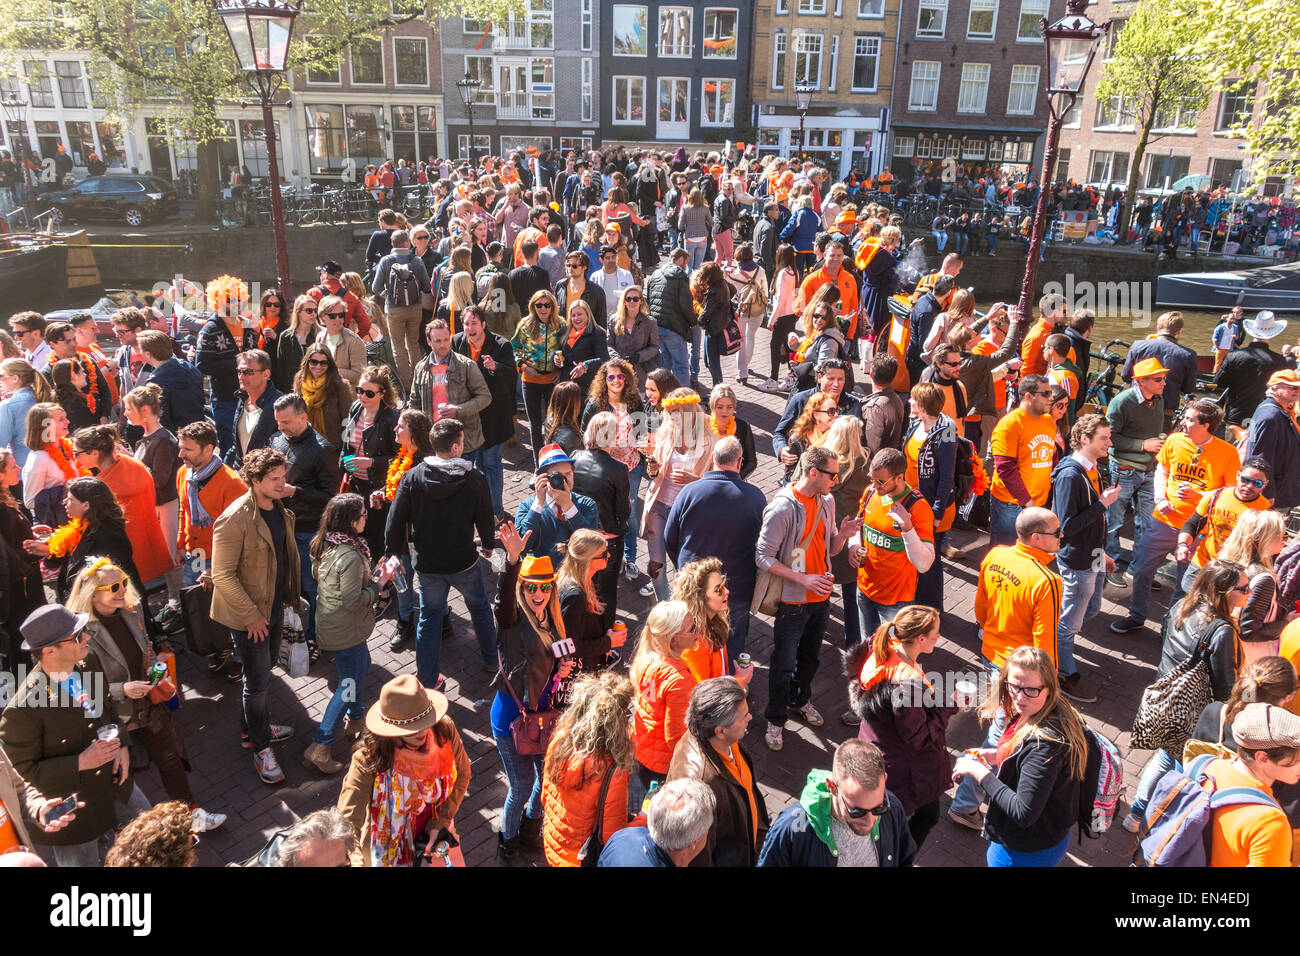 Crowds of people on a bridge celebrating Koningsdag, Kings Day in Amsterdam on Prinsengracht Canal. Stock Photo